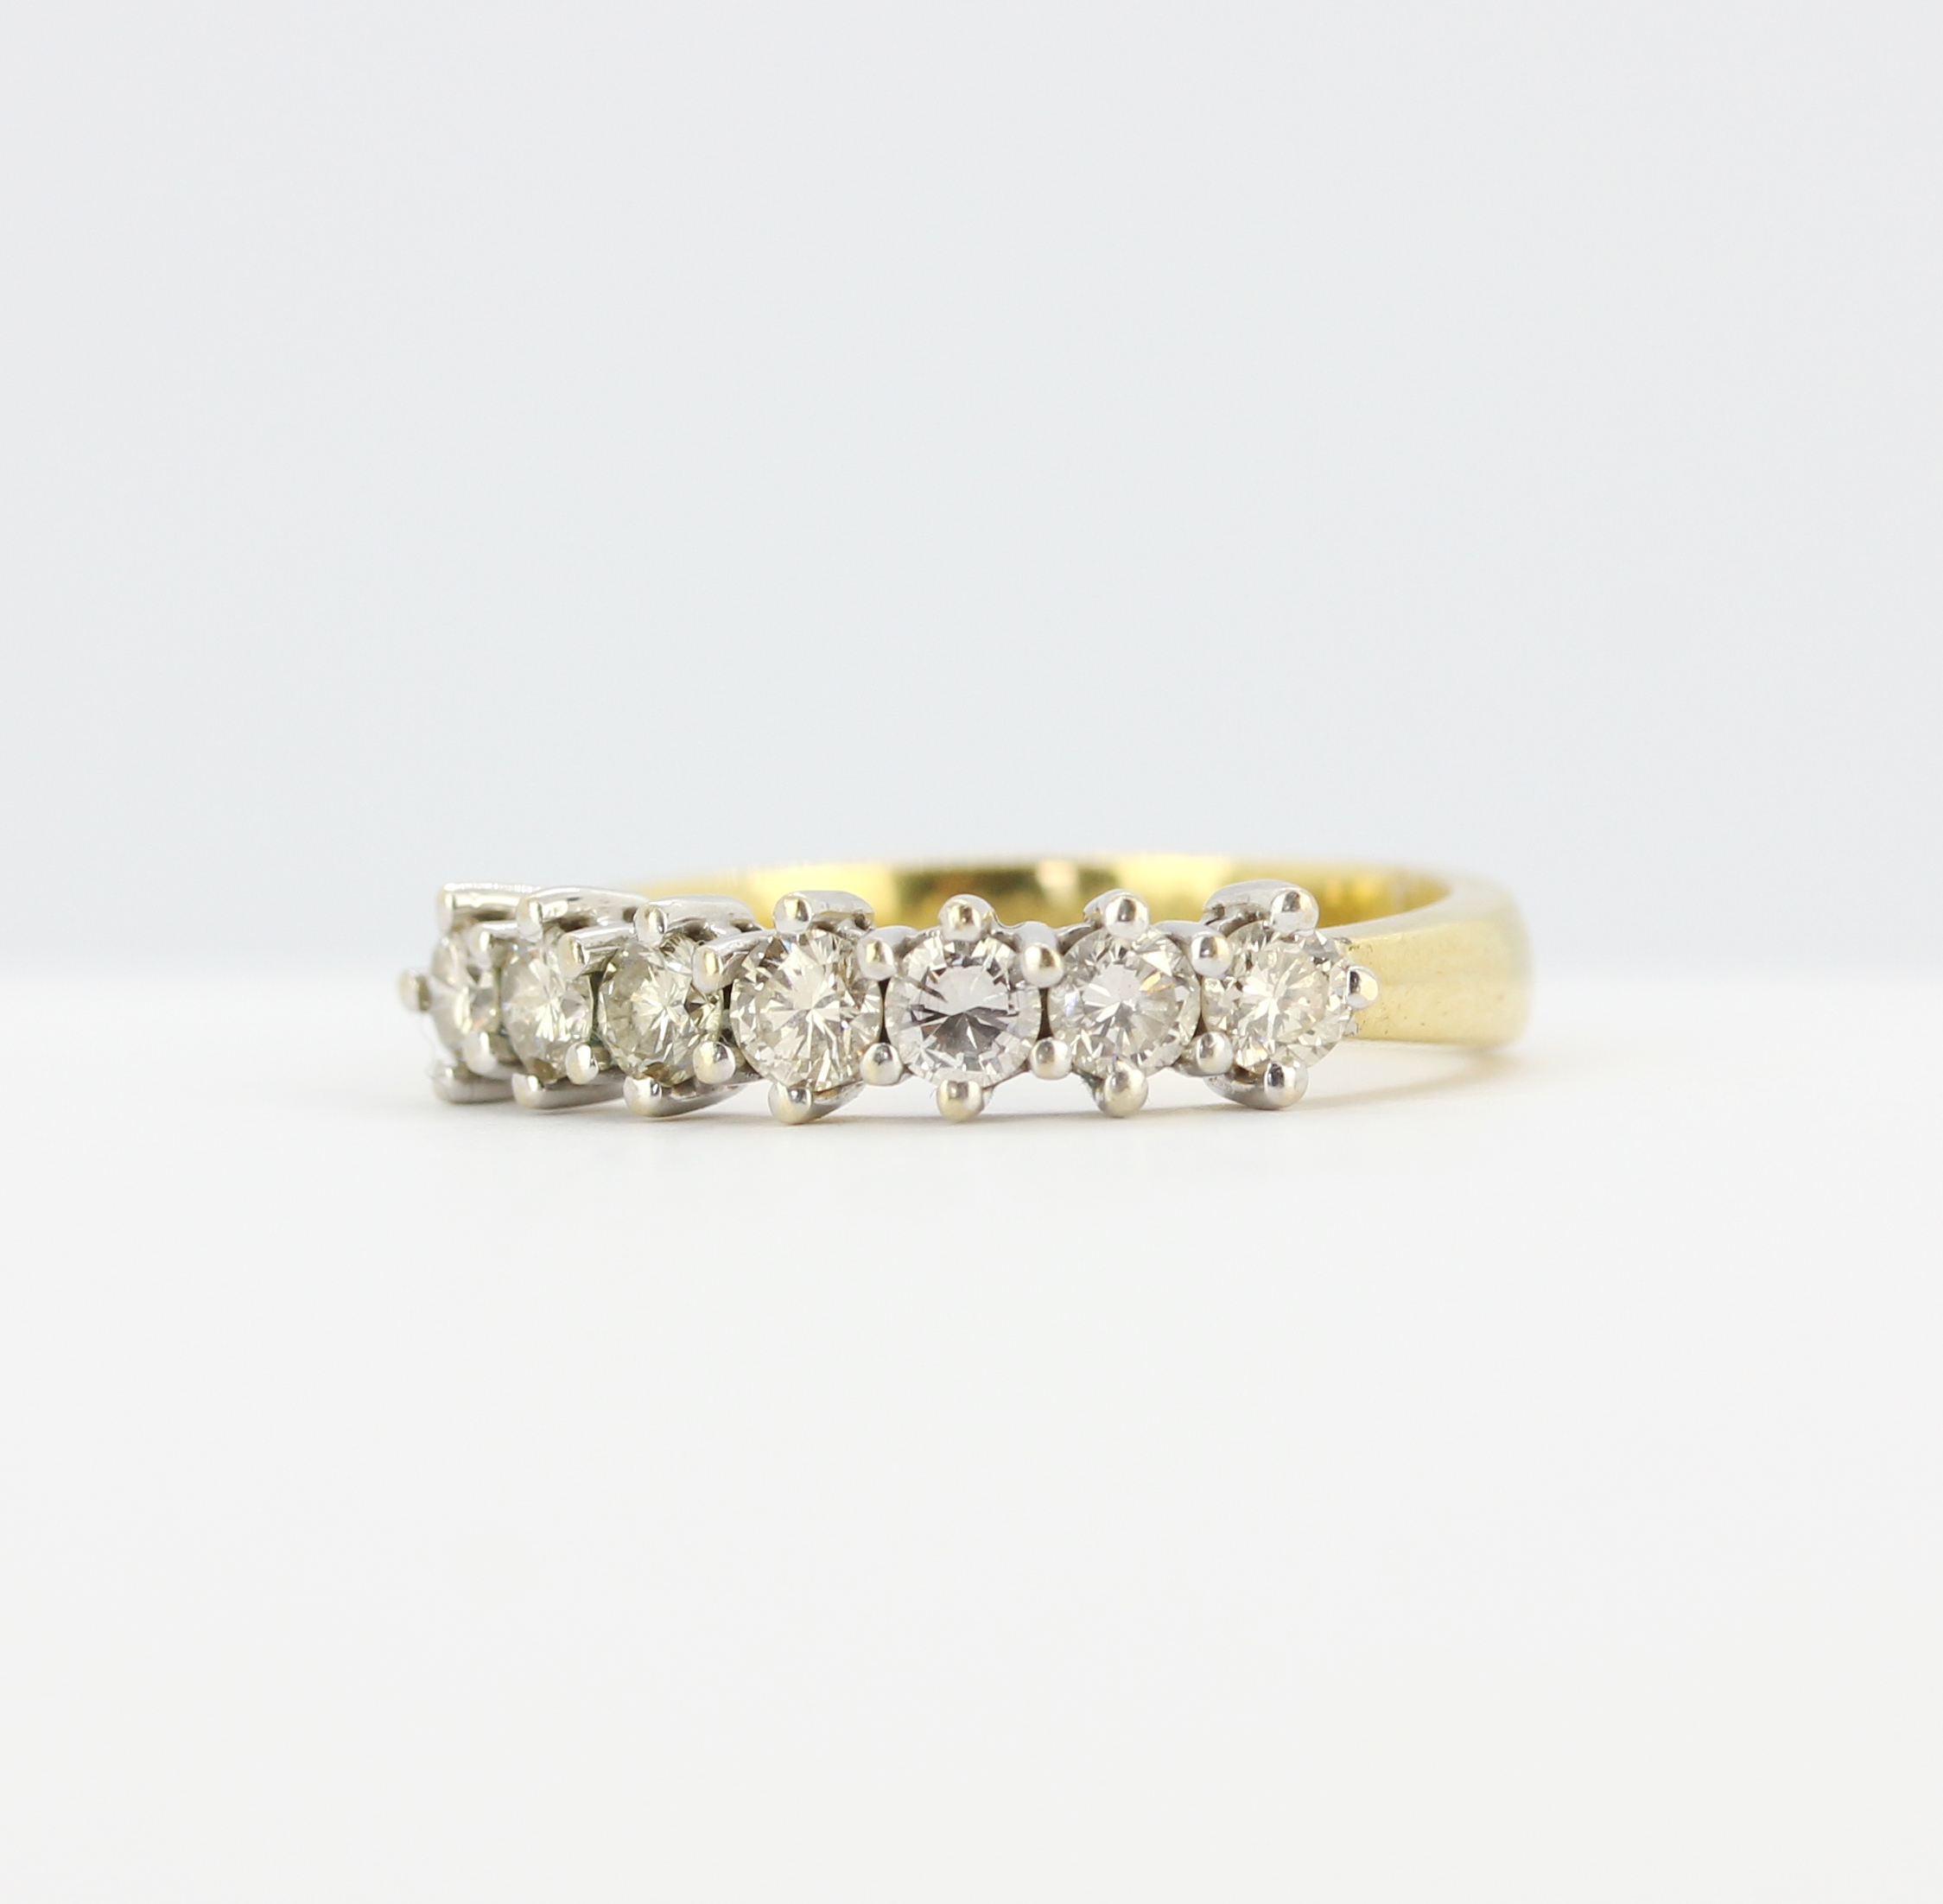 An 18ct yellow gold ring set with brilliant cut diamonds, (N), approx. 0.70ct total. - Image 2 of 3